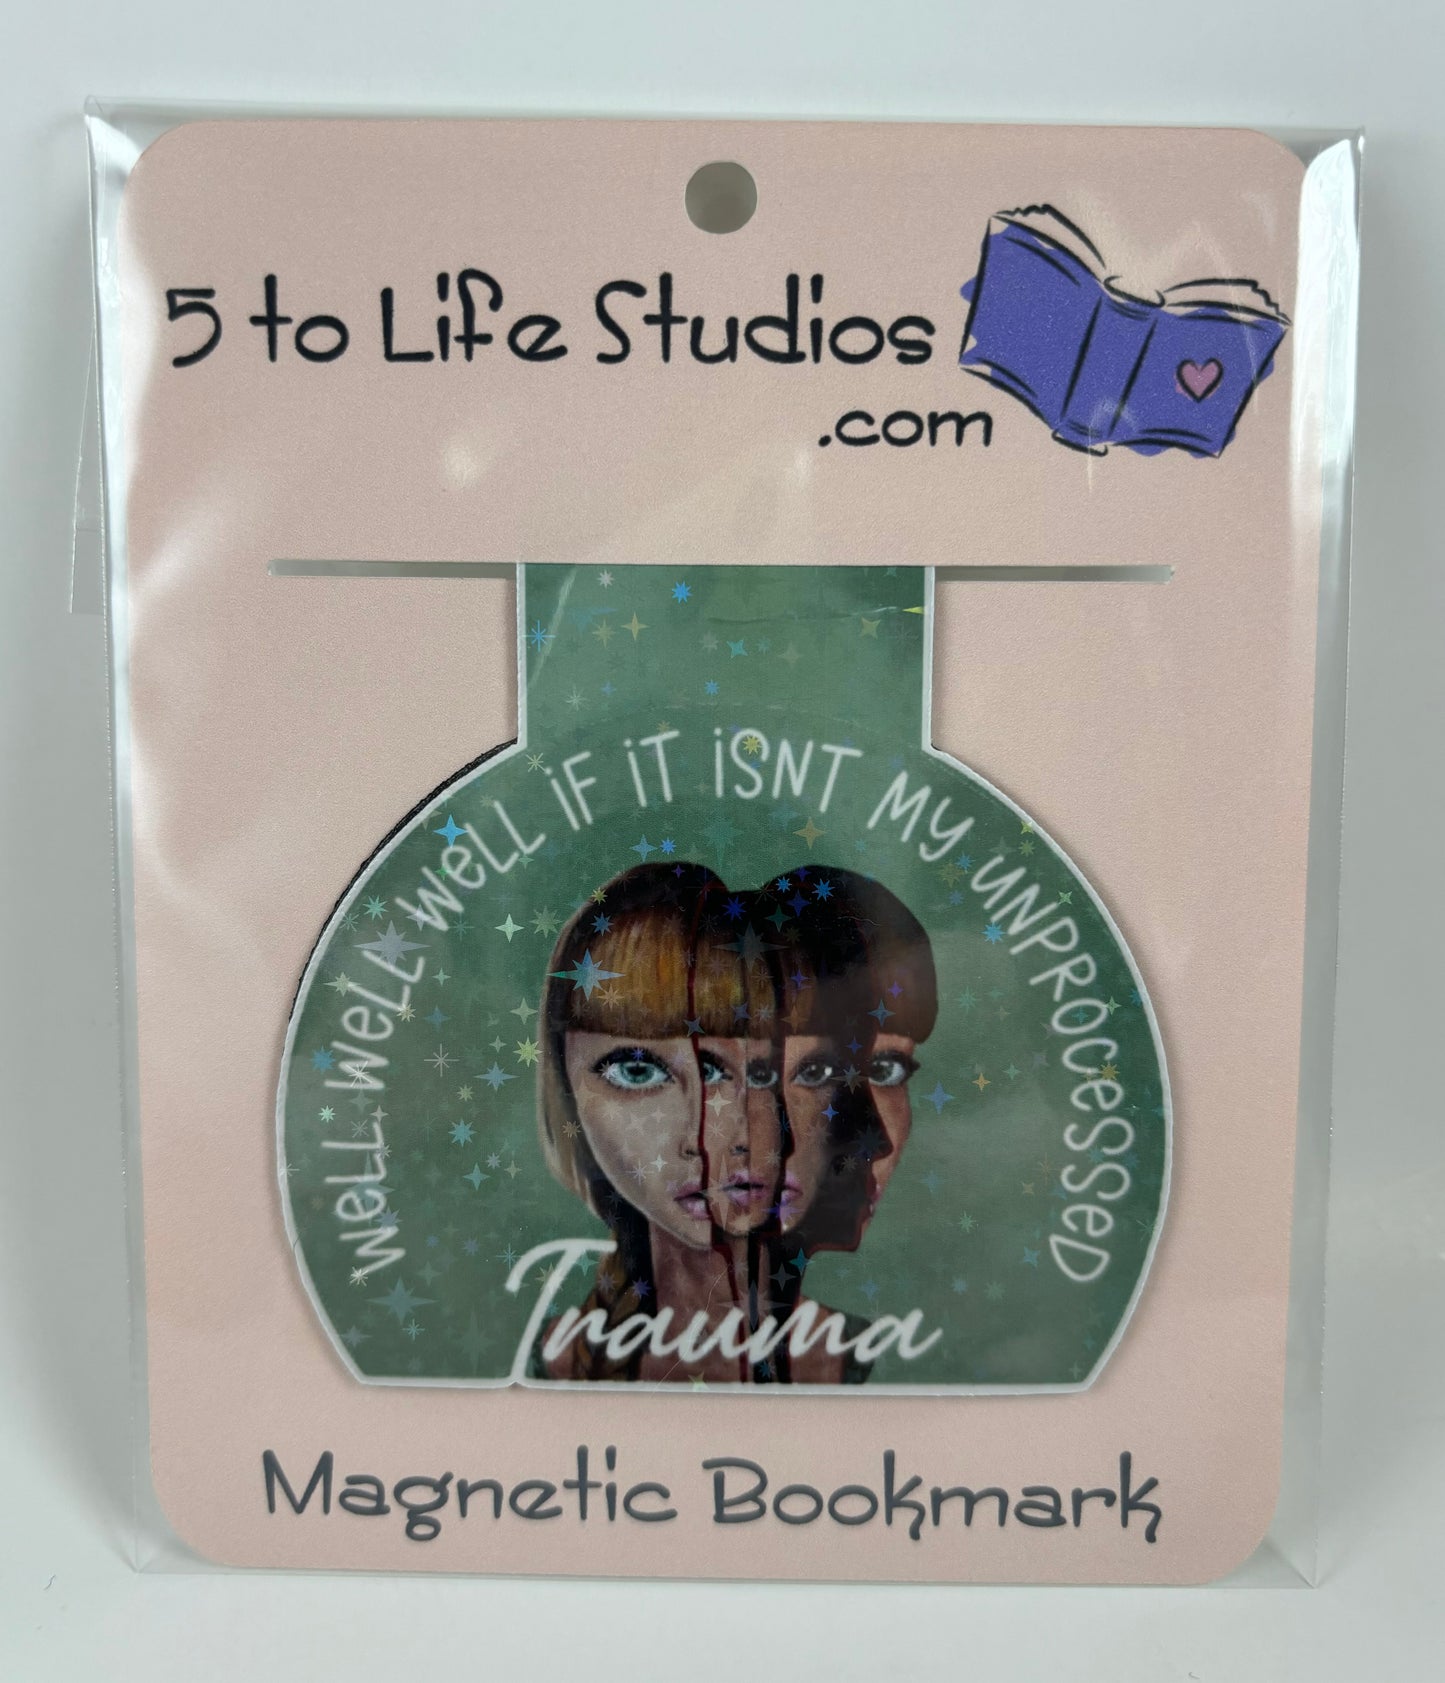 Slimclick Magnetic Bookmark "Well well well if it isn't my unprocessed trauma"